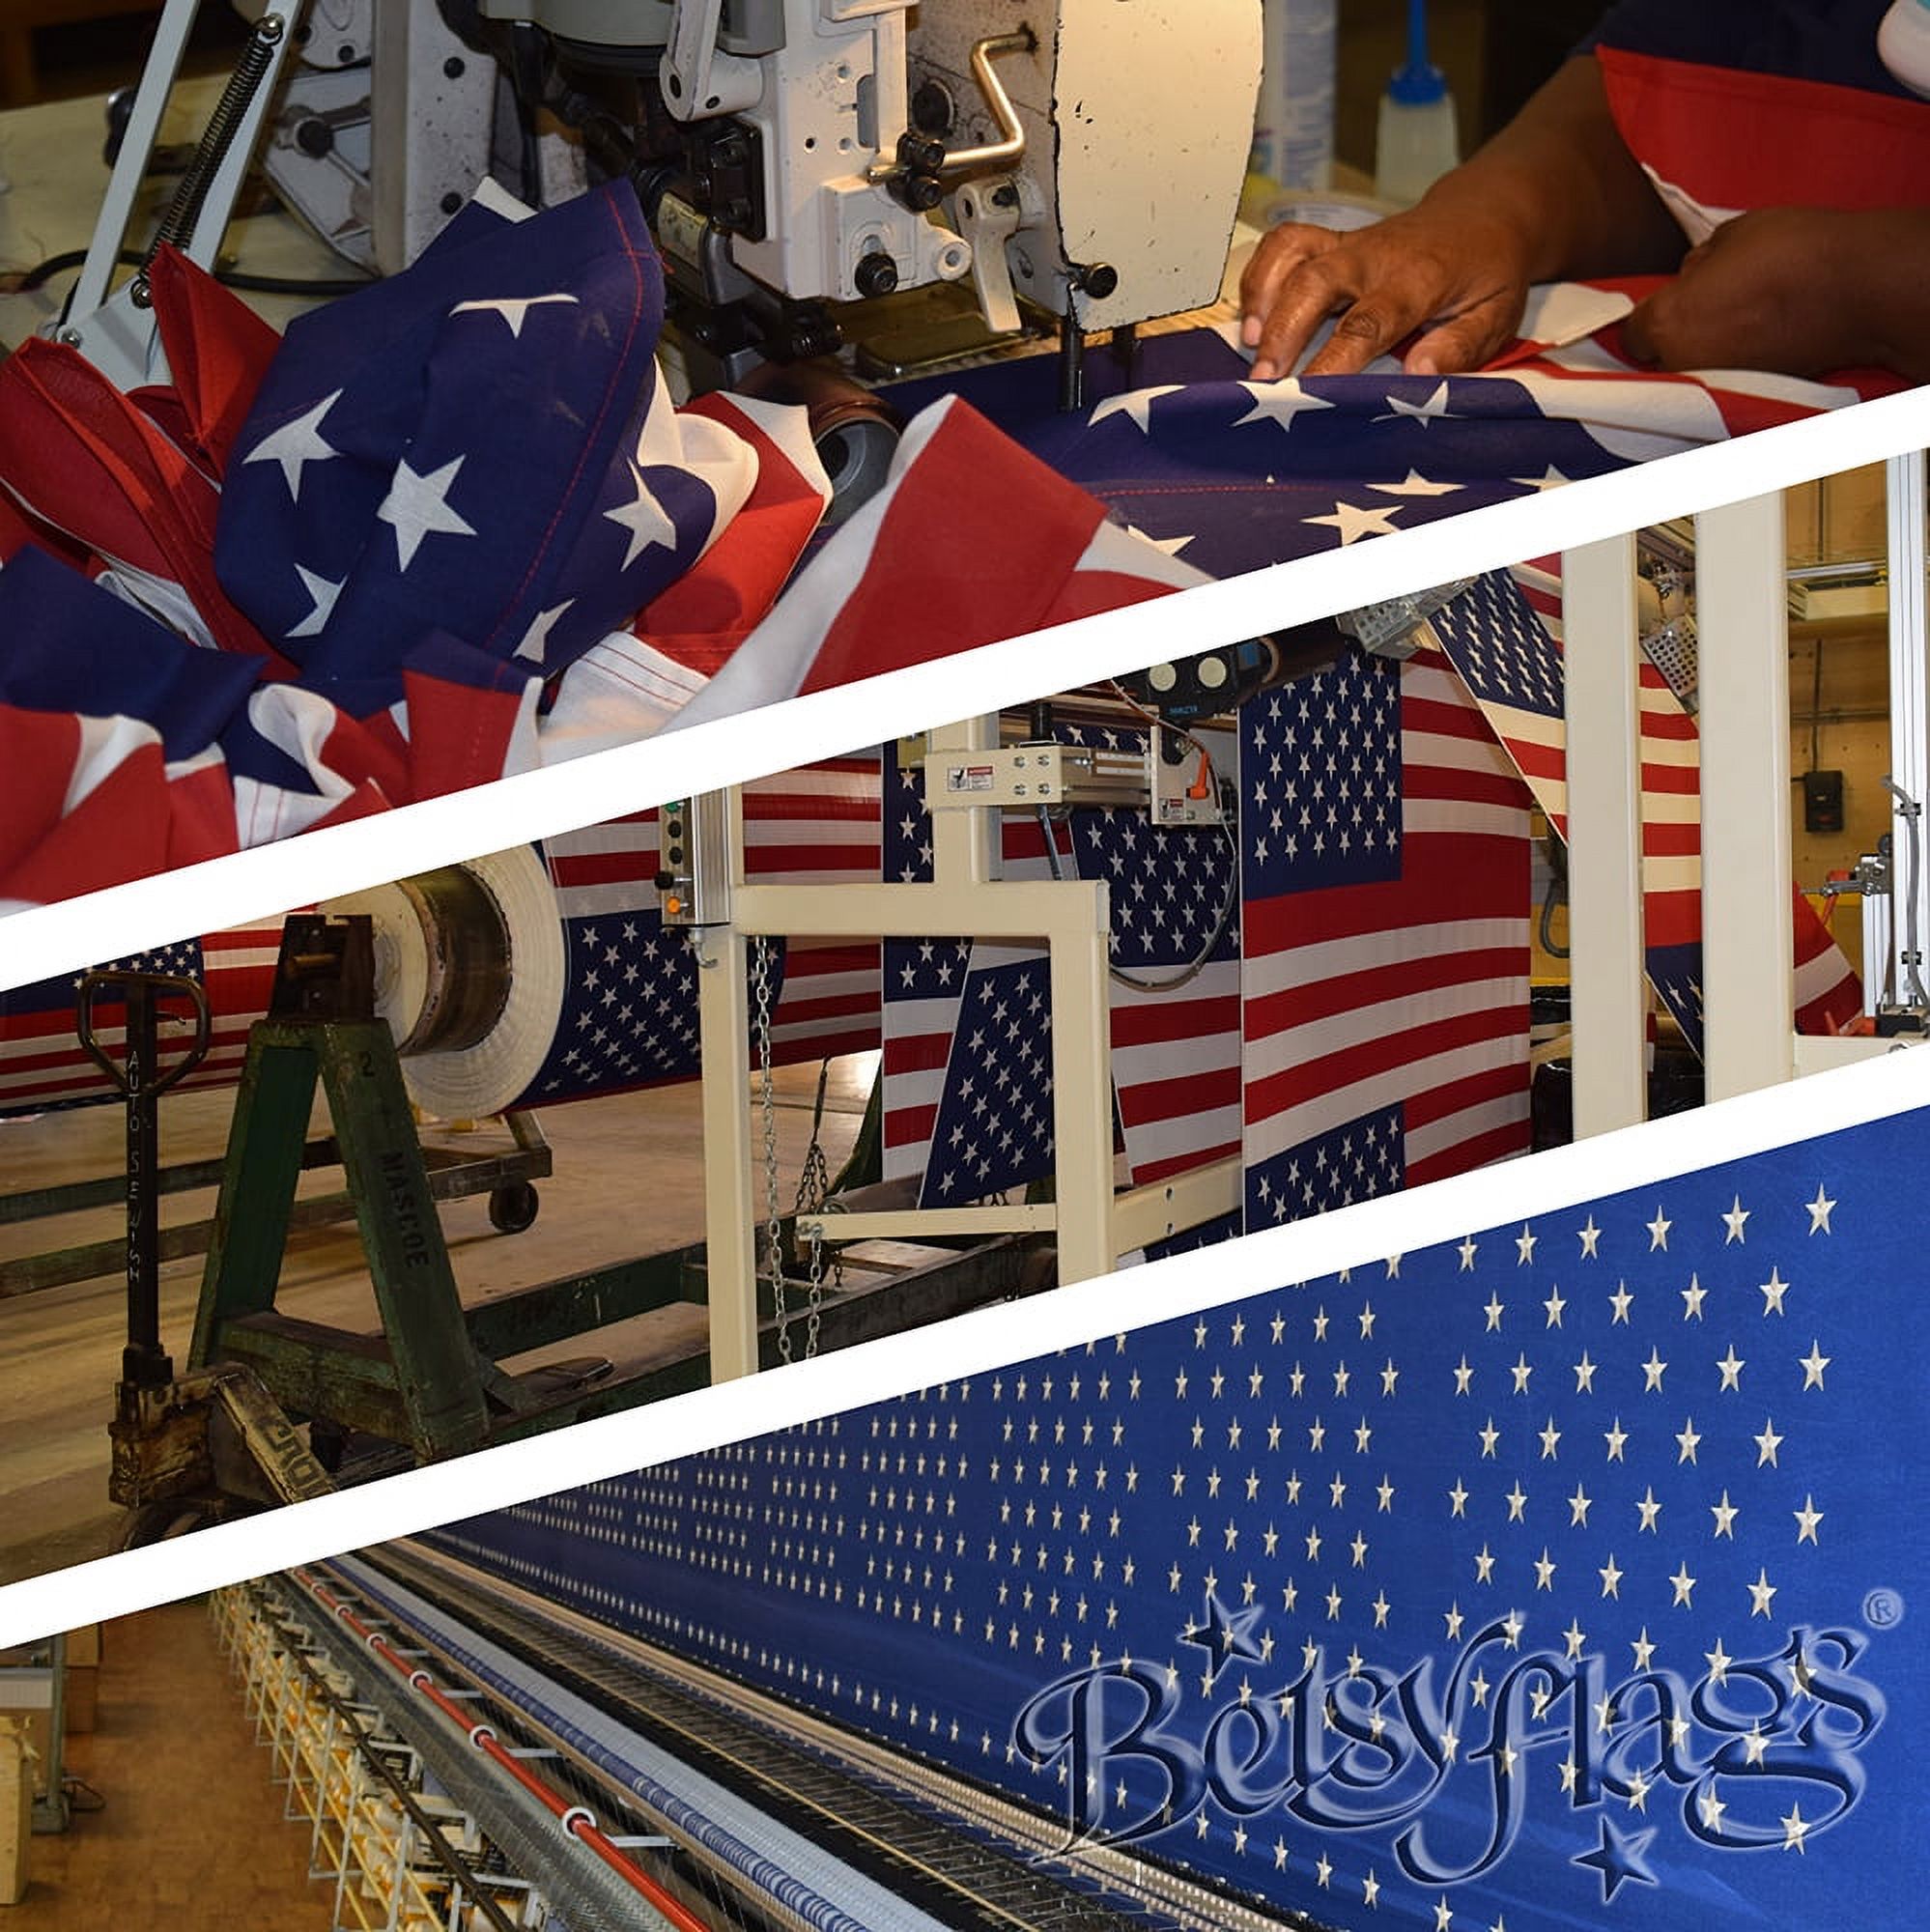 American Nylon Sewn and Embroidered Flag with Brass Grommets by Betsy Flags, 4' x 6' - image 2 of 7